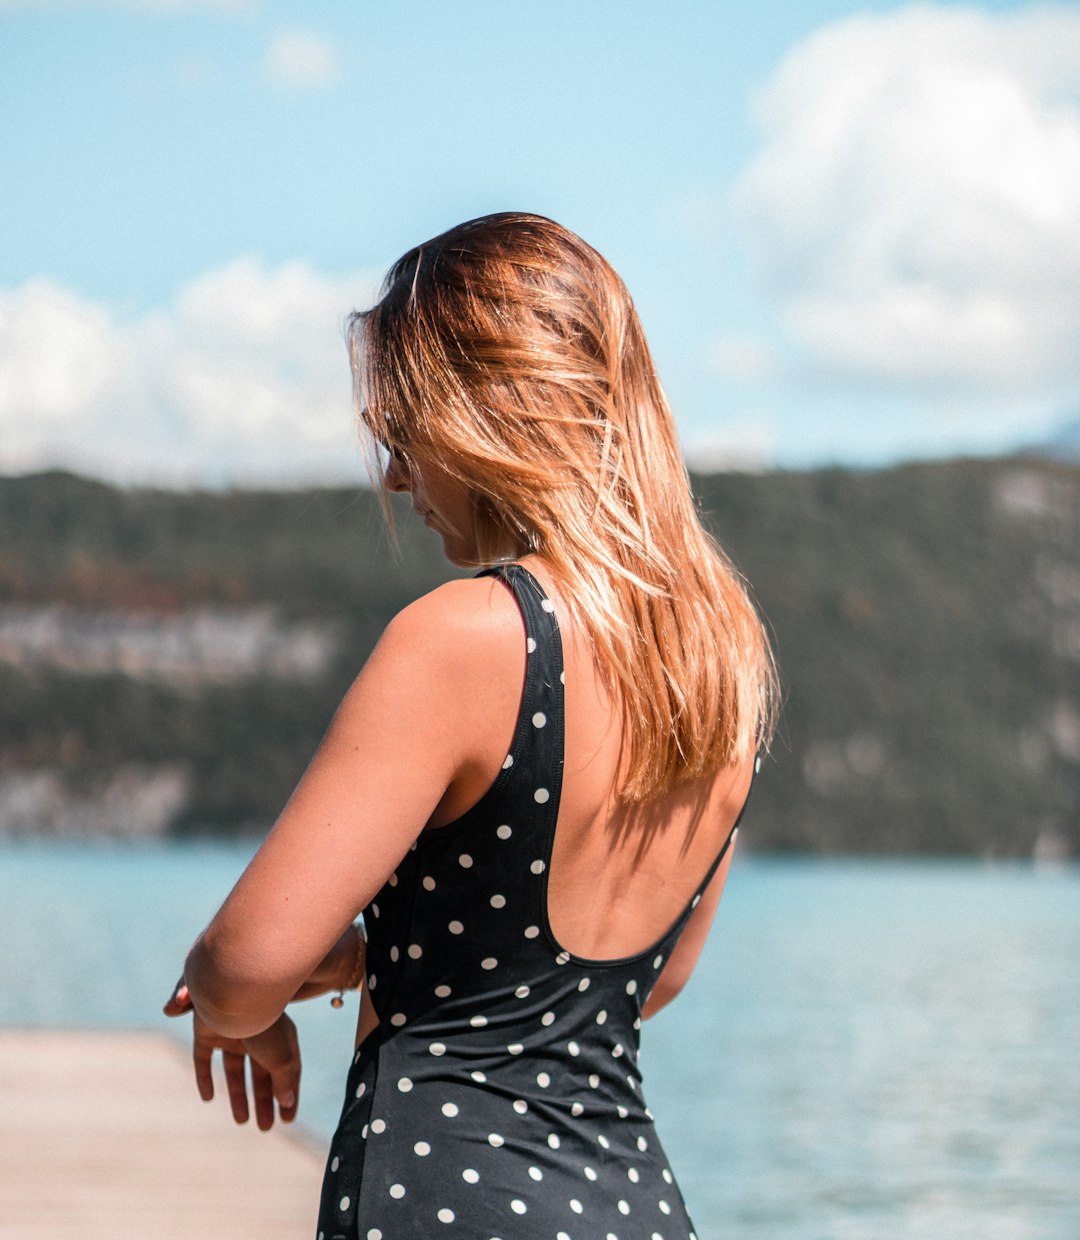 woman in black and white polka dot tank top standing on seashore during daytime